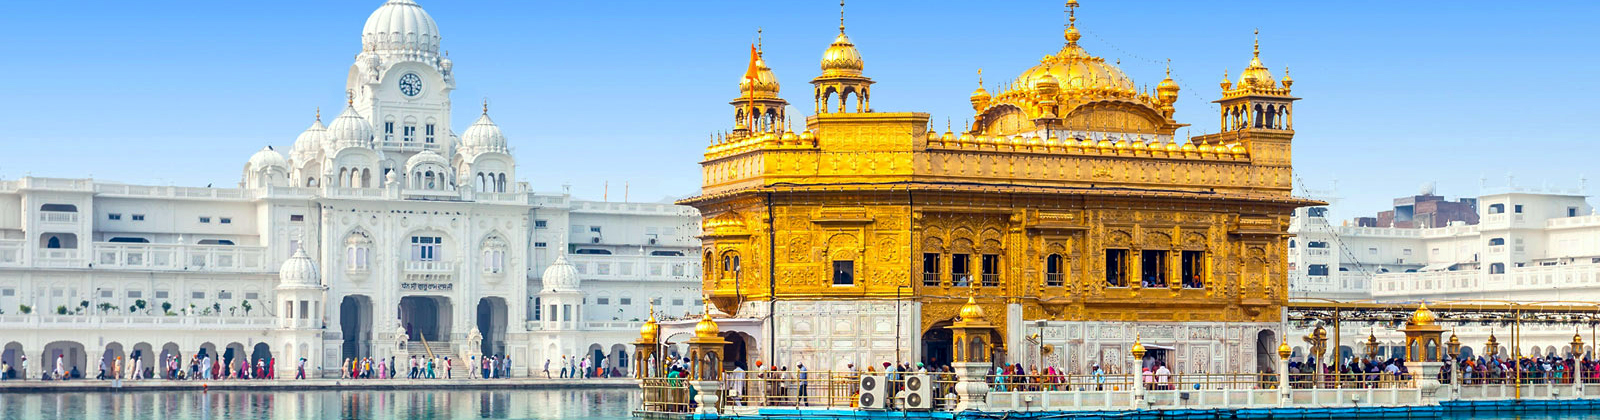 Classic North India Tour with Golden Temple